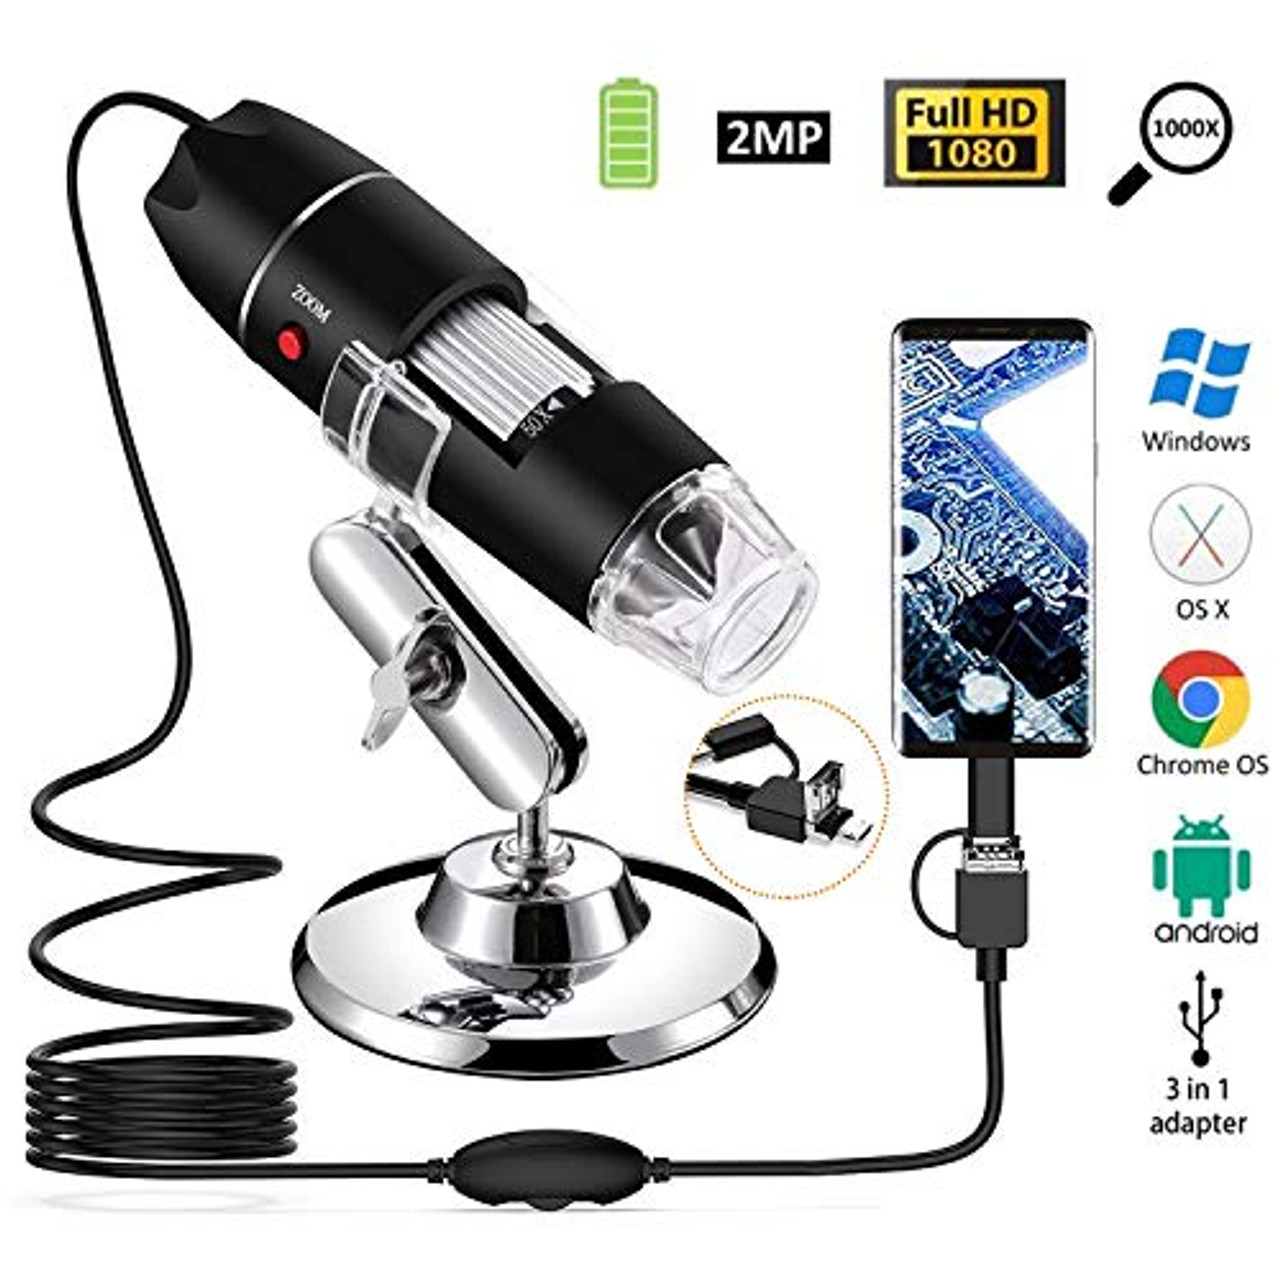 Mini Camera with Stand Digital Microscope 2MP 8 LED USB 2.0 & Micro Digital Microscope 0 to 1000X Magnification Endoscope Compatible with Mac Windows 7 8 10 Android Linux 